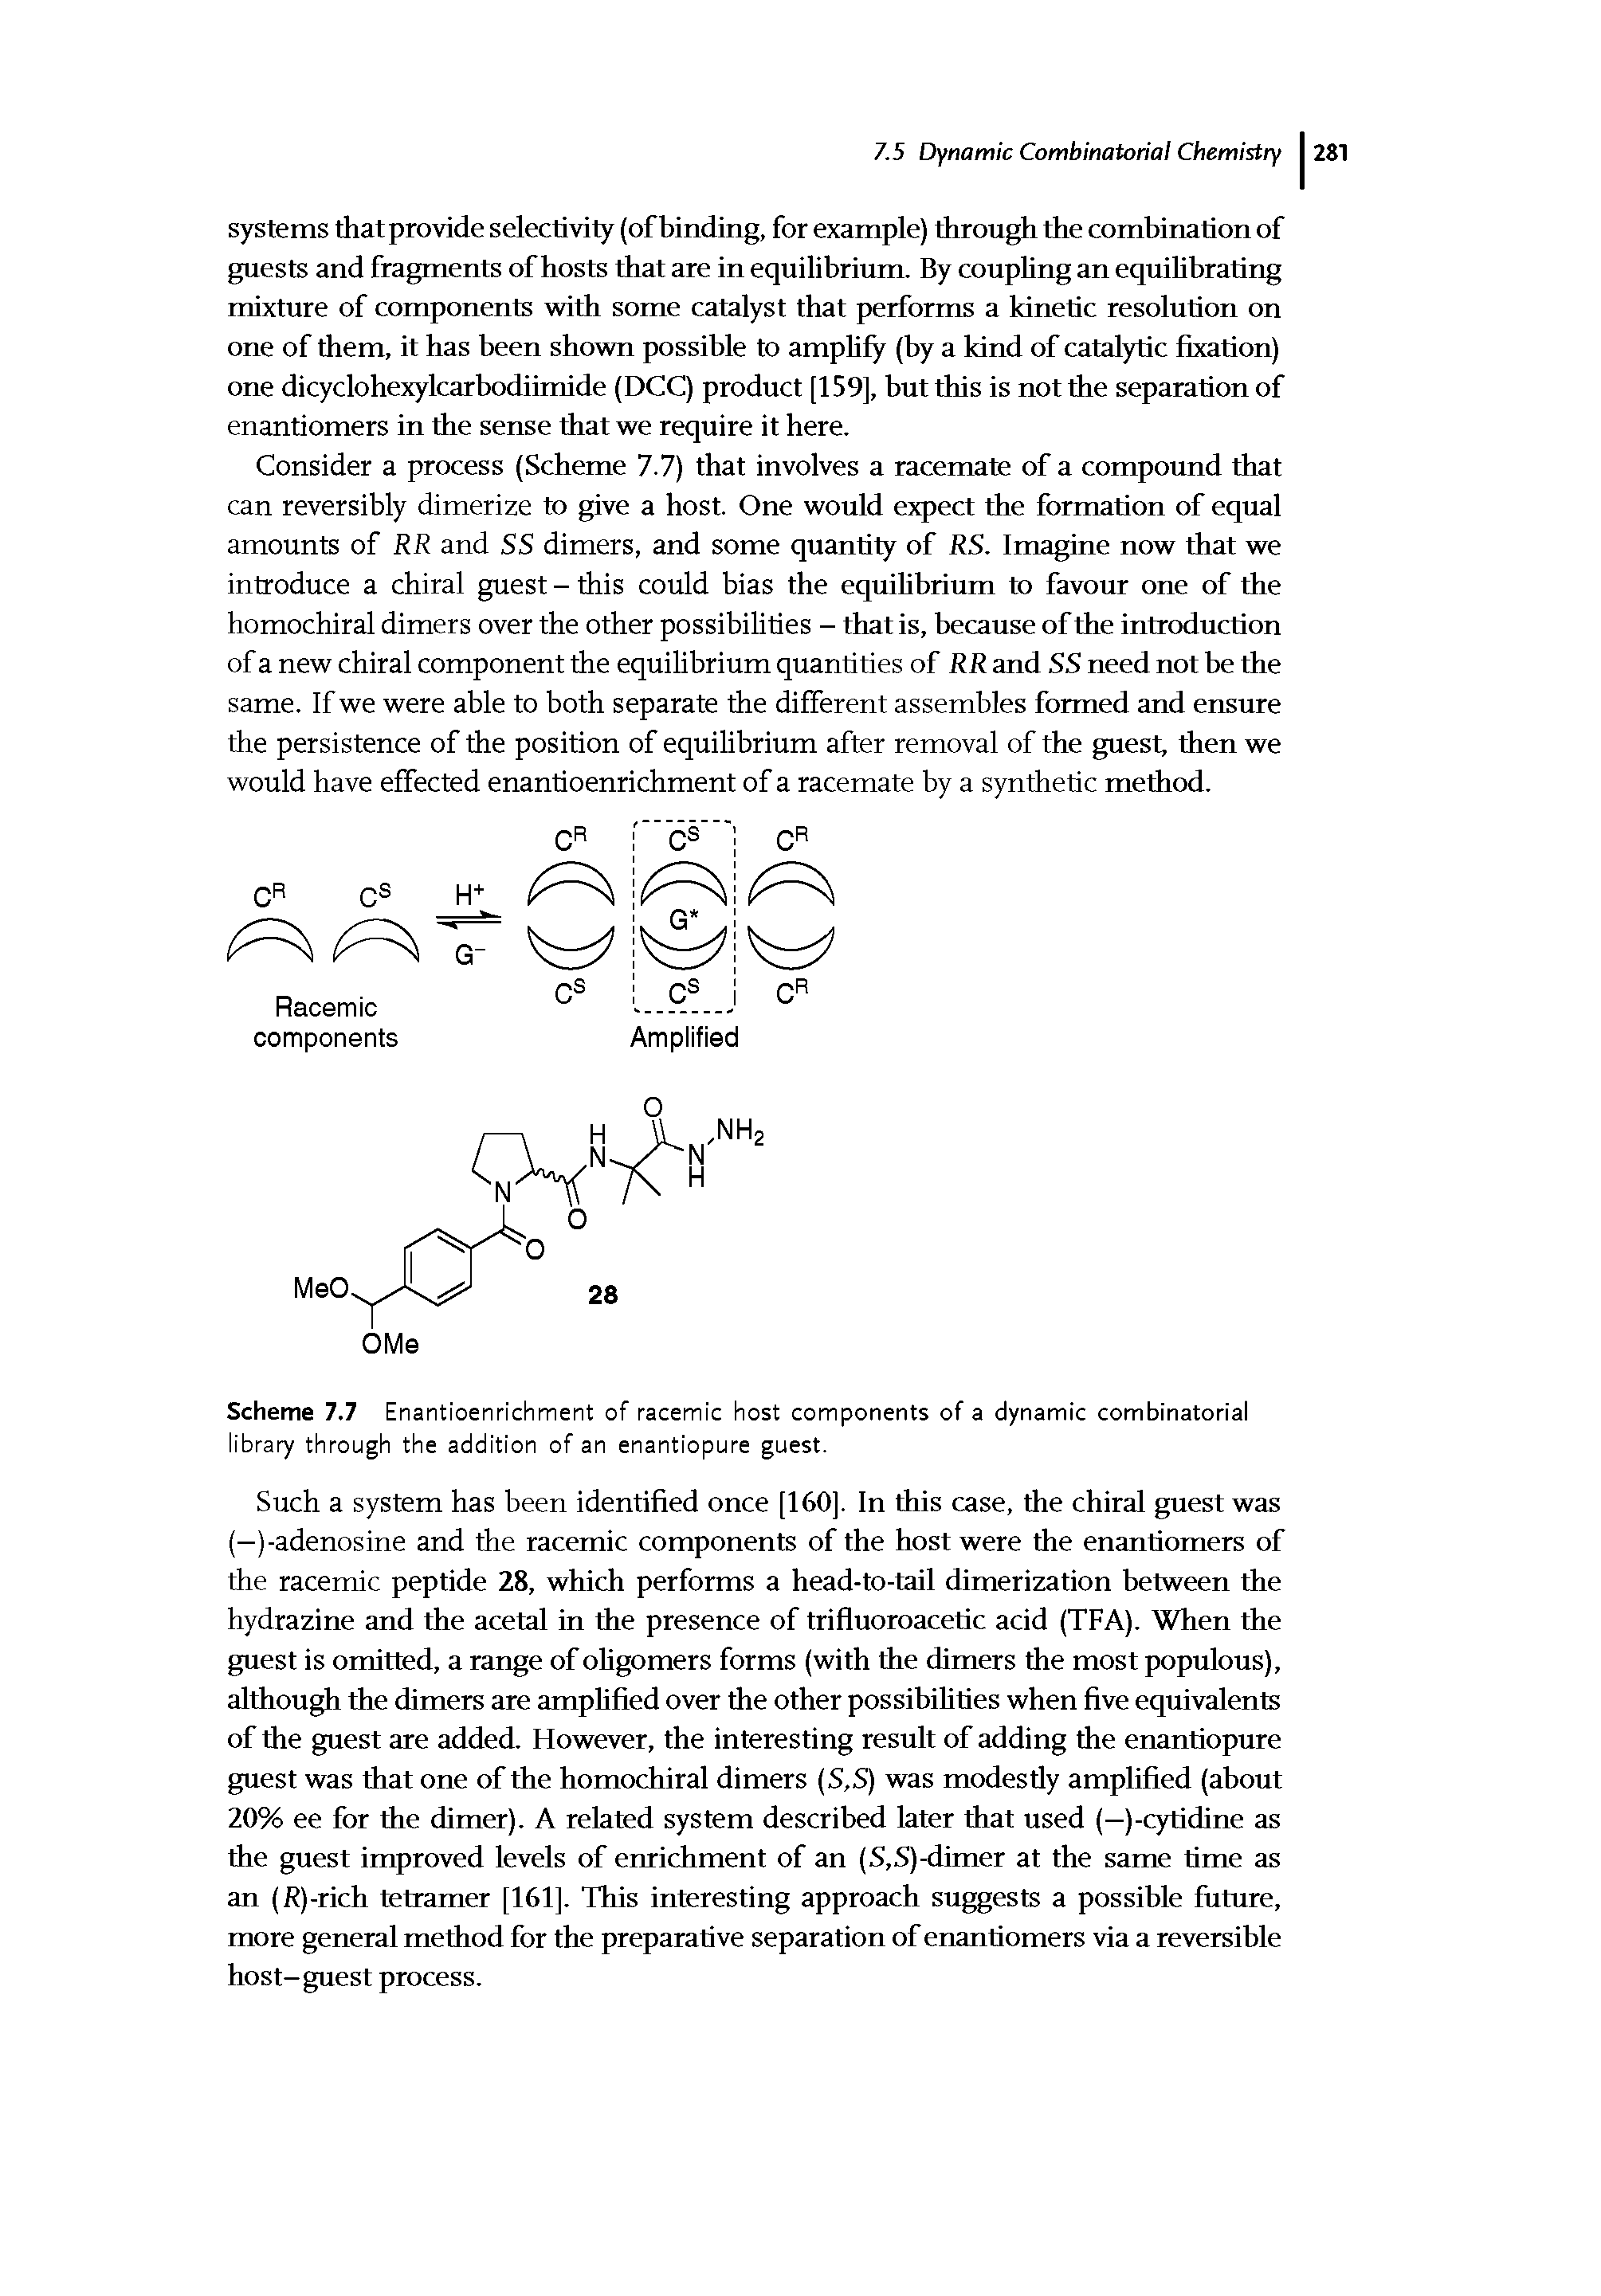 Scheme 7.7 Enantioenrichment of racemic host components of a dynamic combinatorial library through the addition of an enantiopure guest.